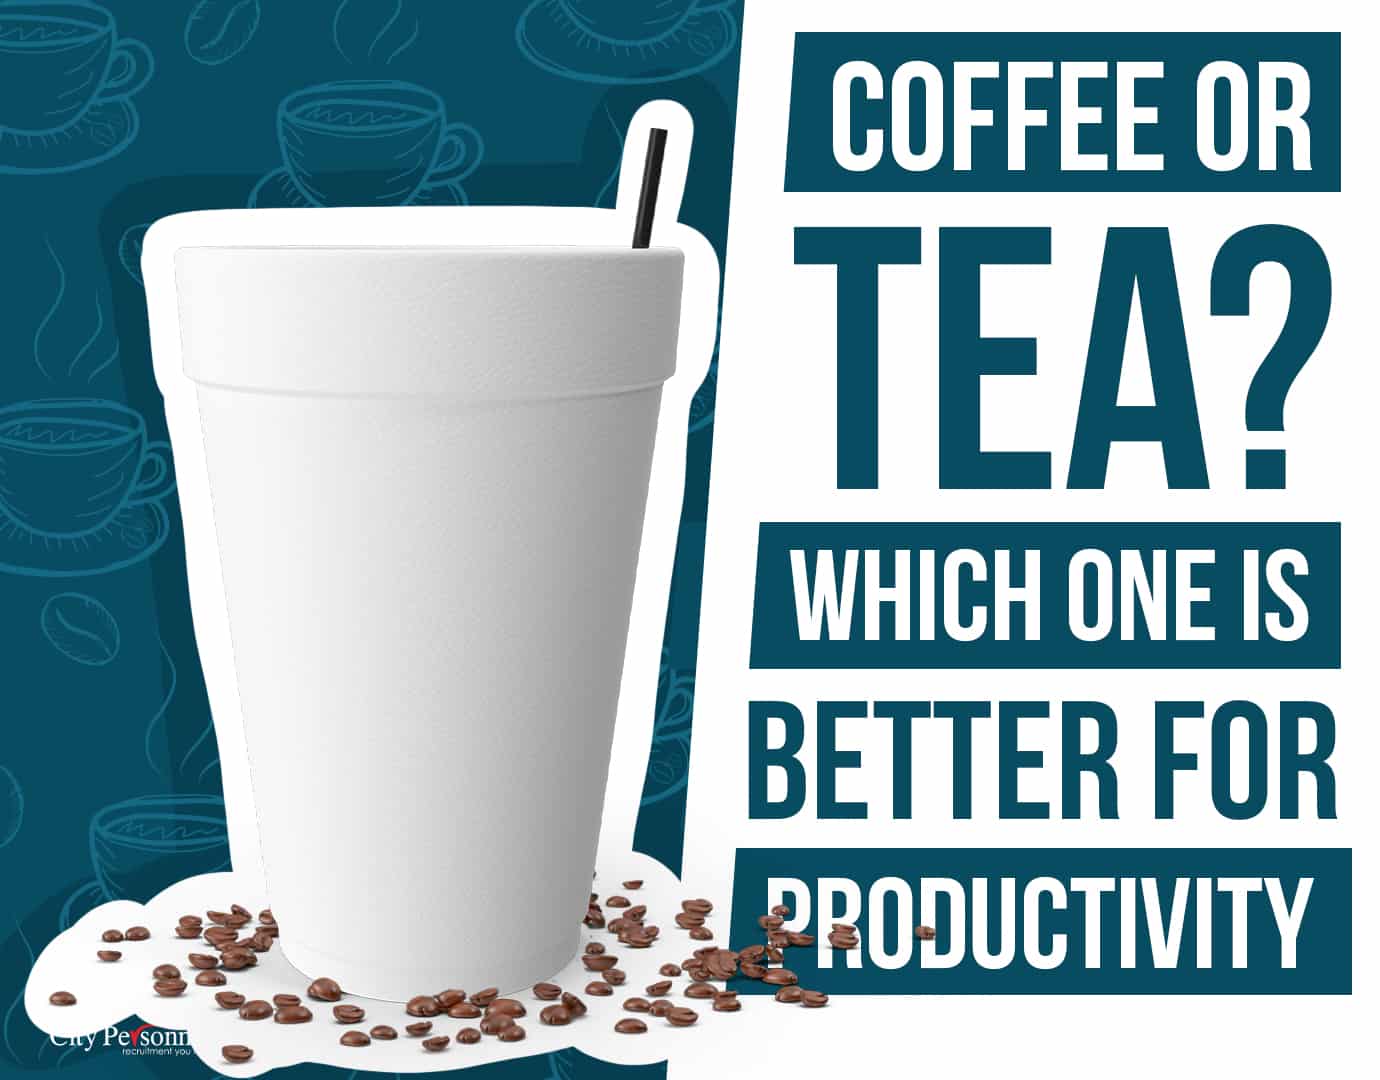 Coffee or Tea Better for Productivity